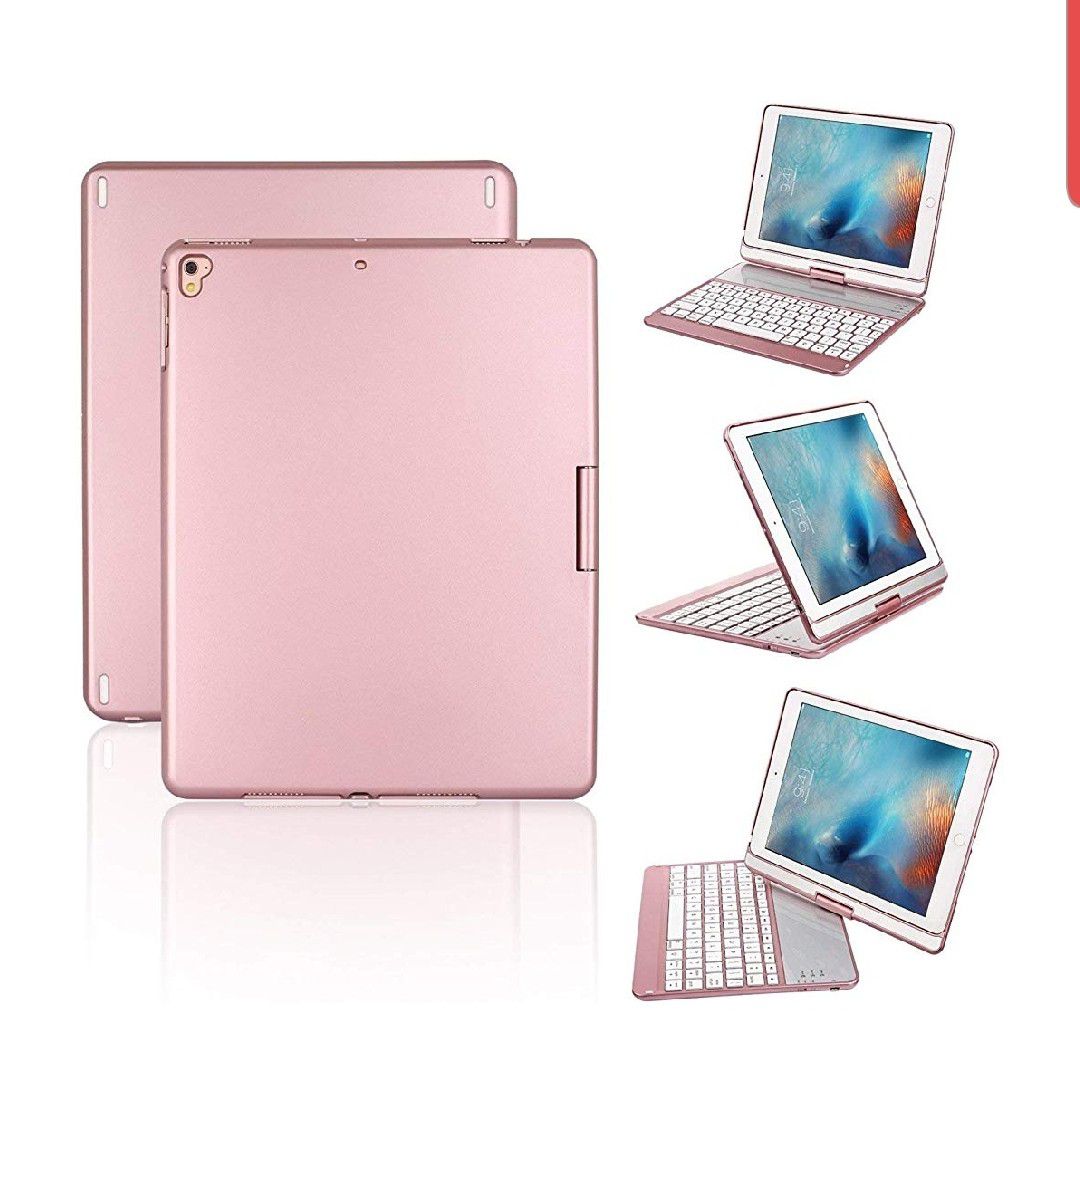 Proslife iPad Keyboard Case, 360 Degree Rotatable Cover with Wireless Keyboard, 7 Colors Backlit